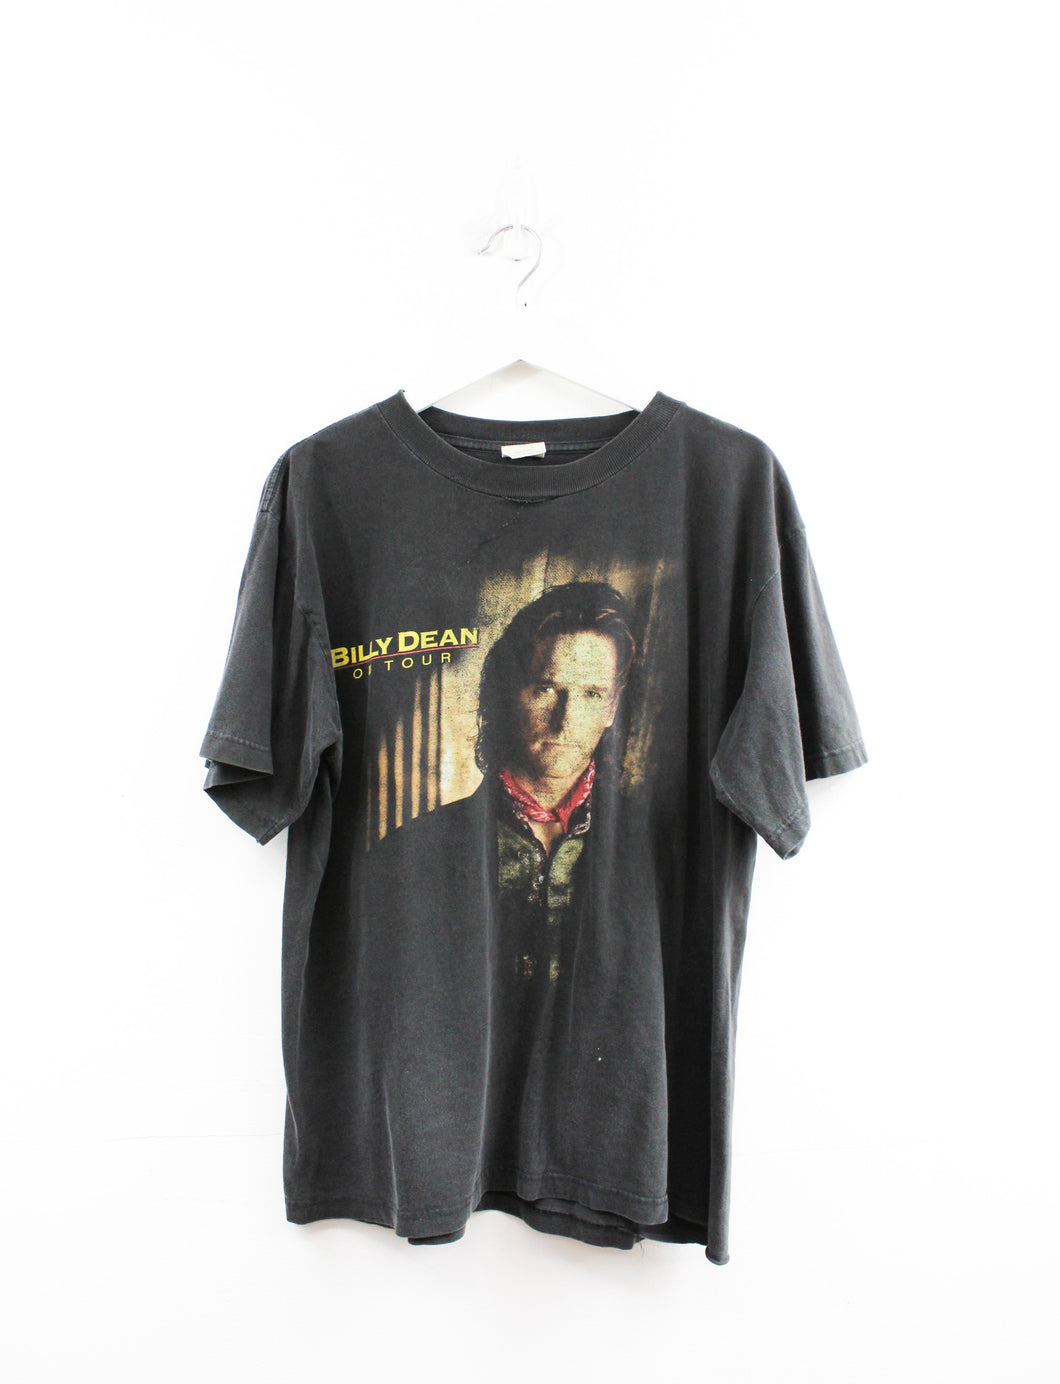 Vintage Billy Dean 1998 It's What I Do Tour Tee